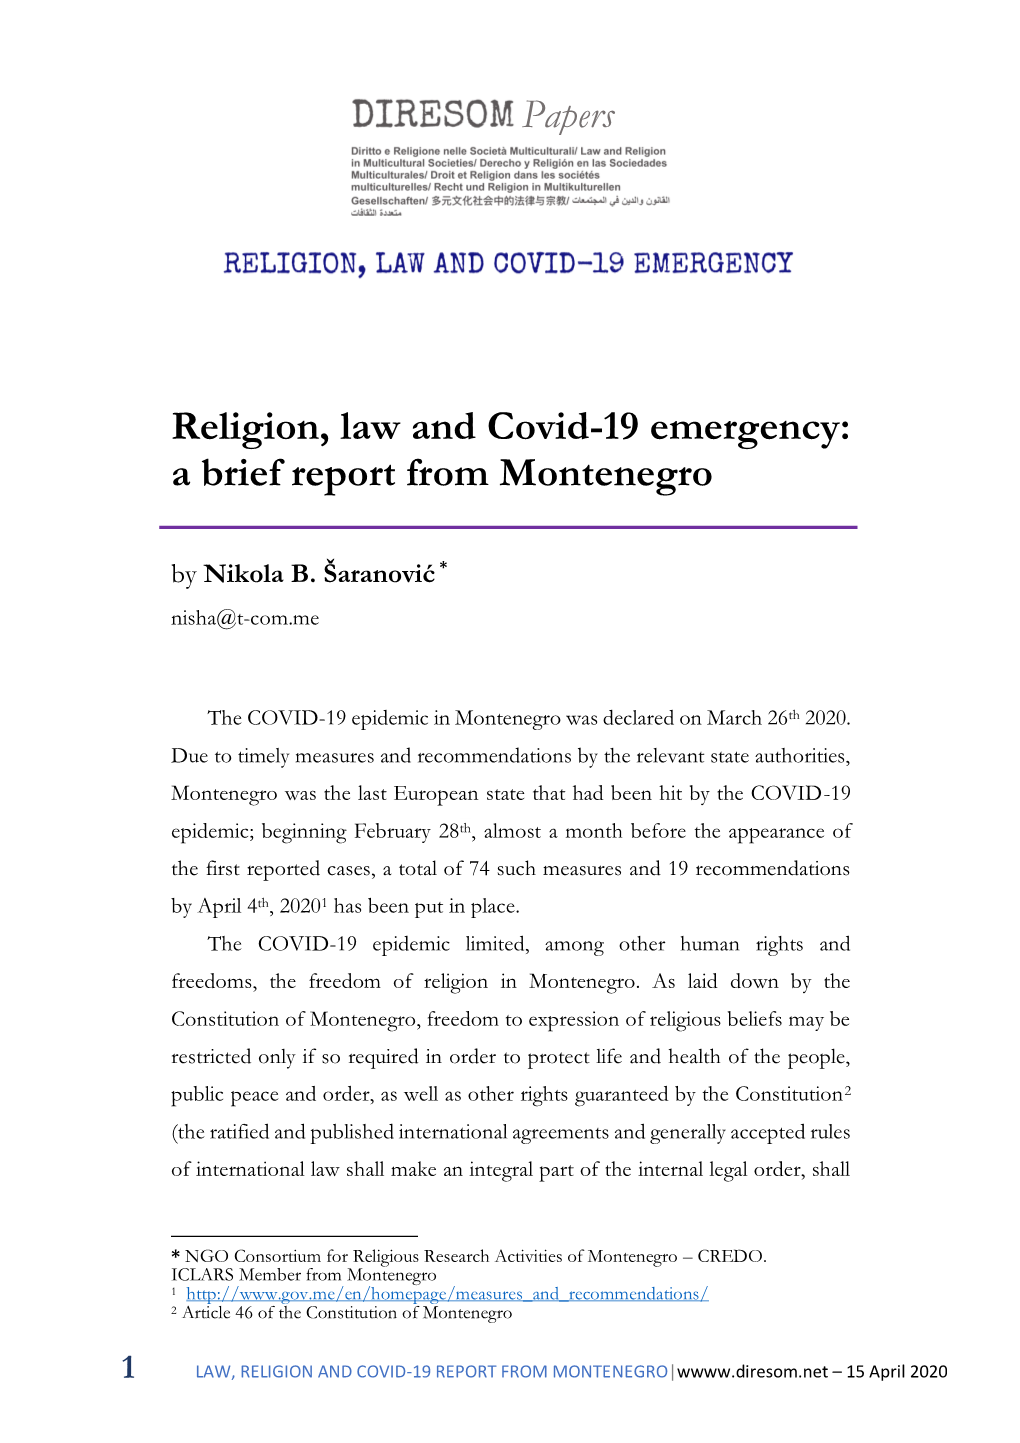 LAW, RELIGION and COVID-19 REPORT from MONTENEGRO|W – 15 April 2020